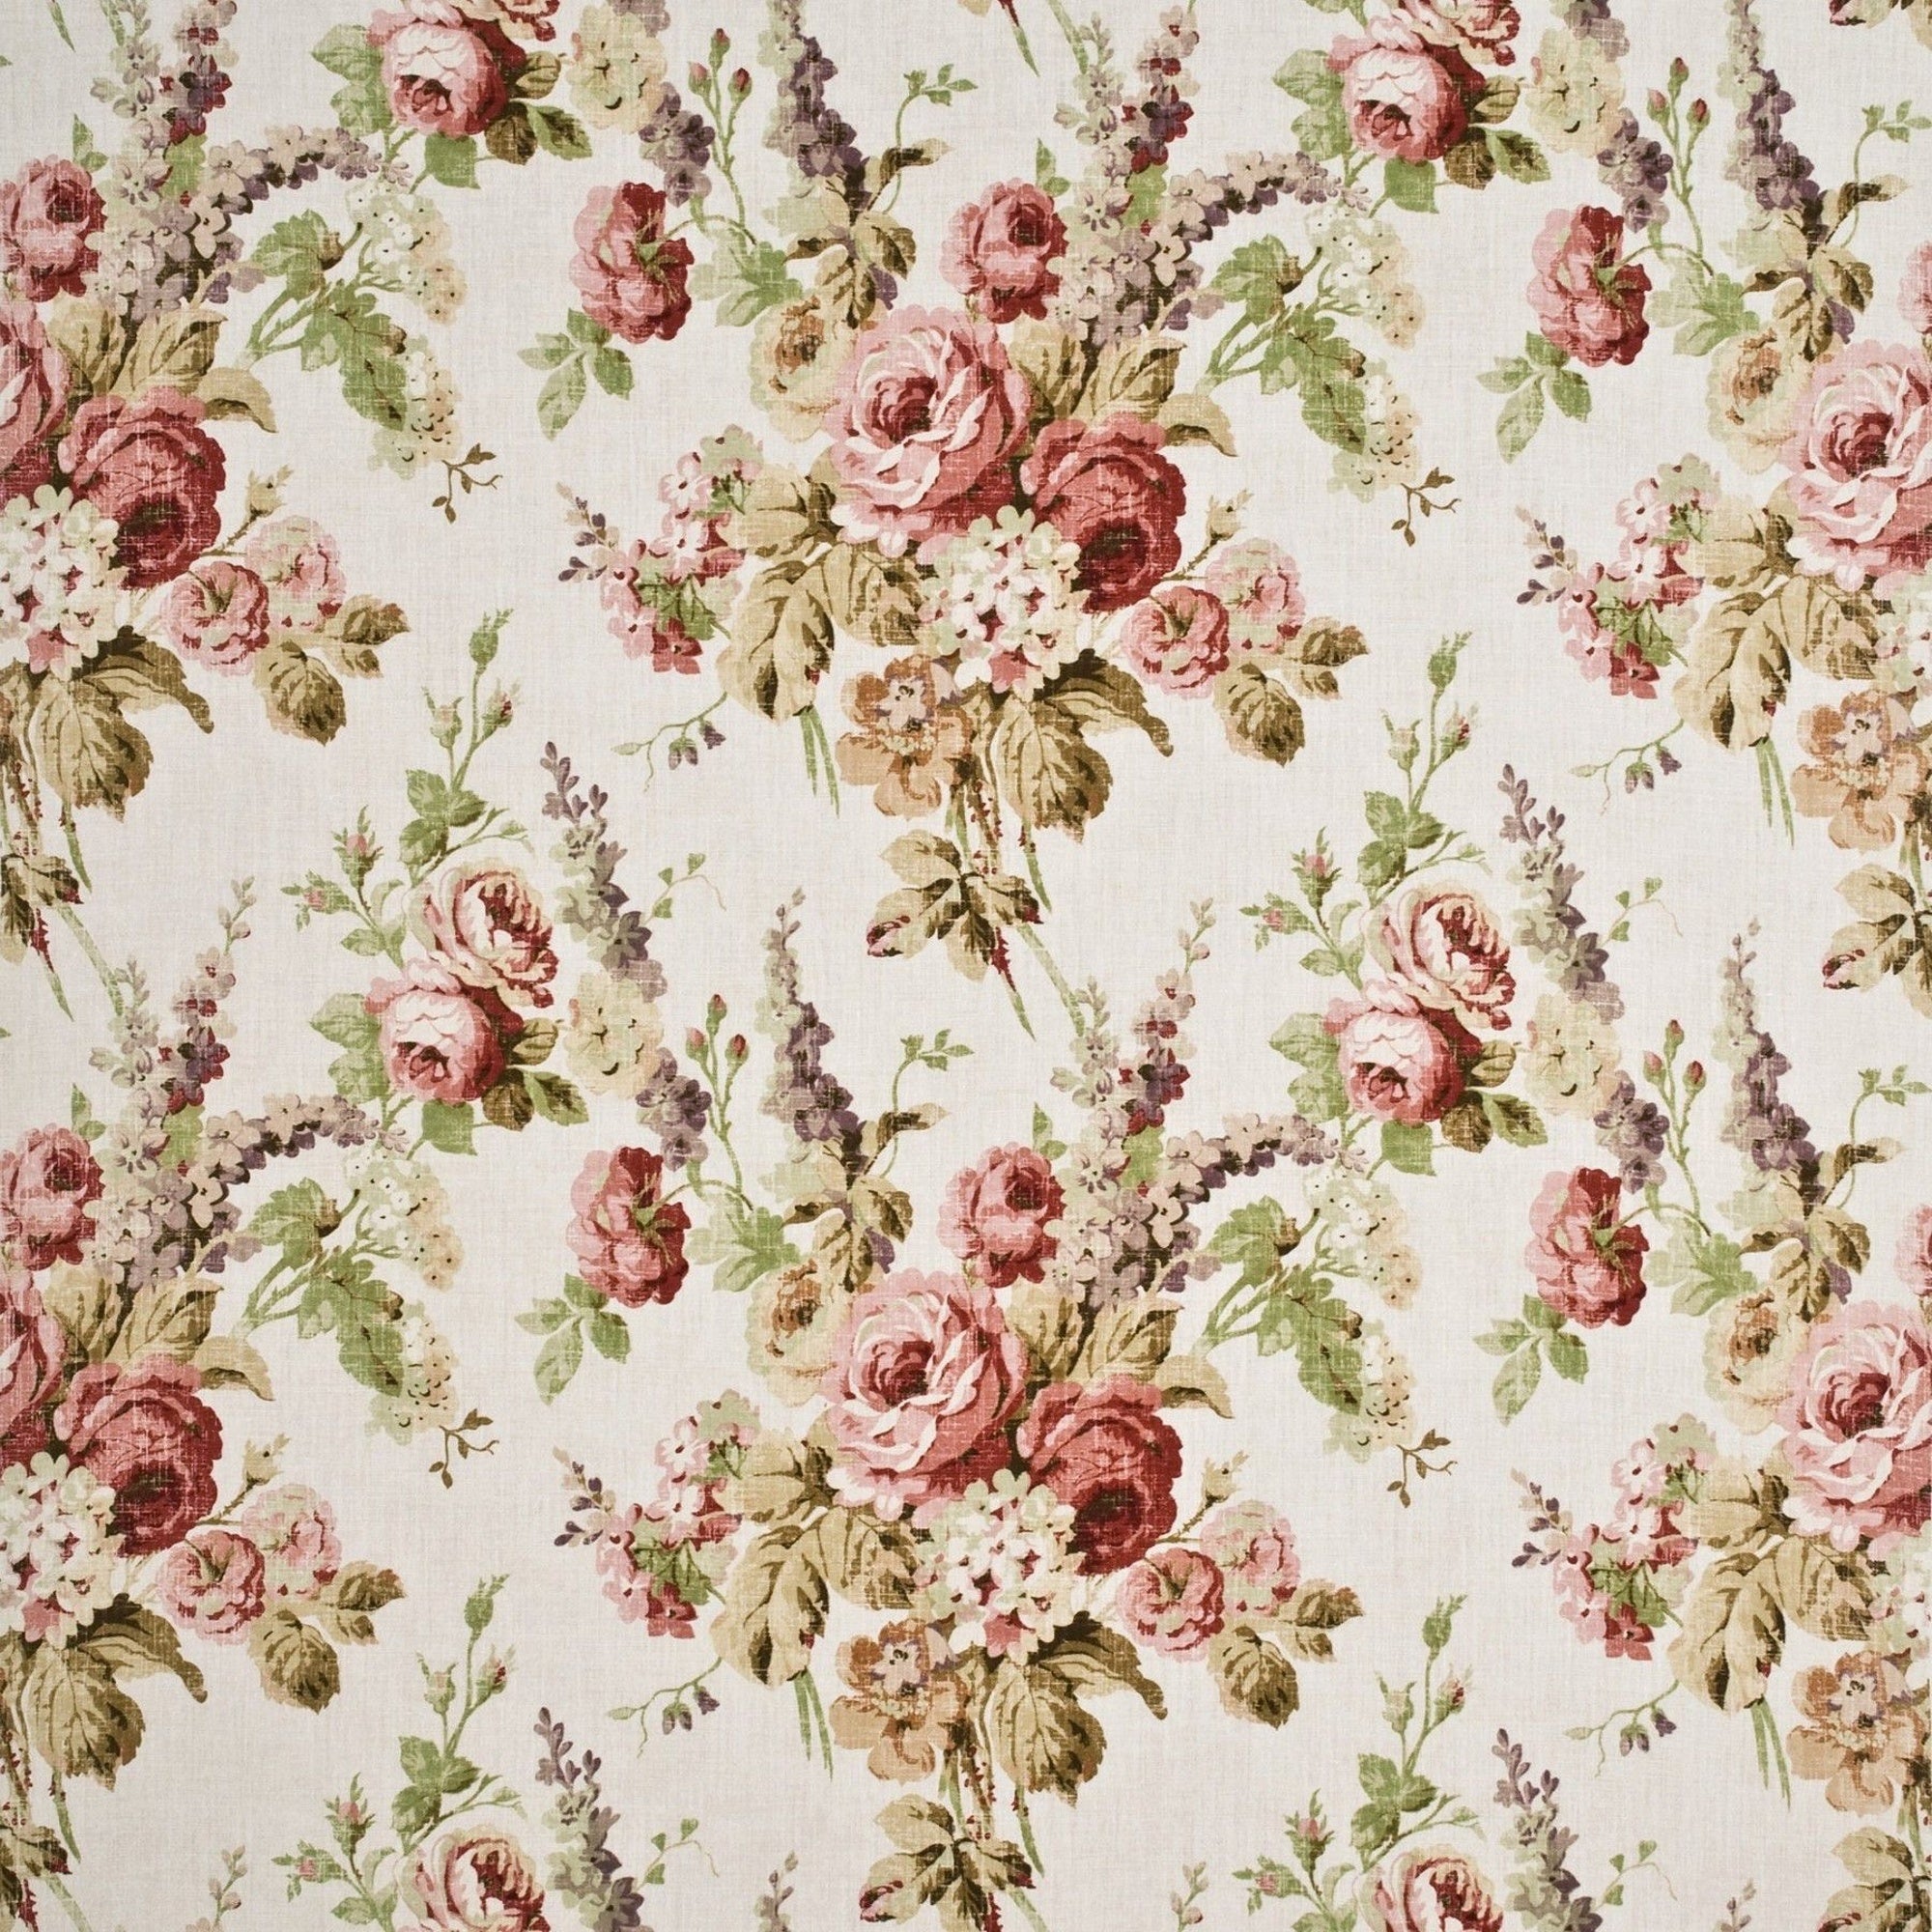 MULBERRY FABRICS - VINTAGE FLORAL - PINK/GREEN/STONE